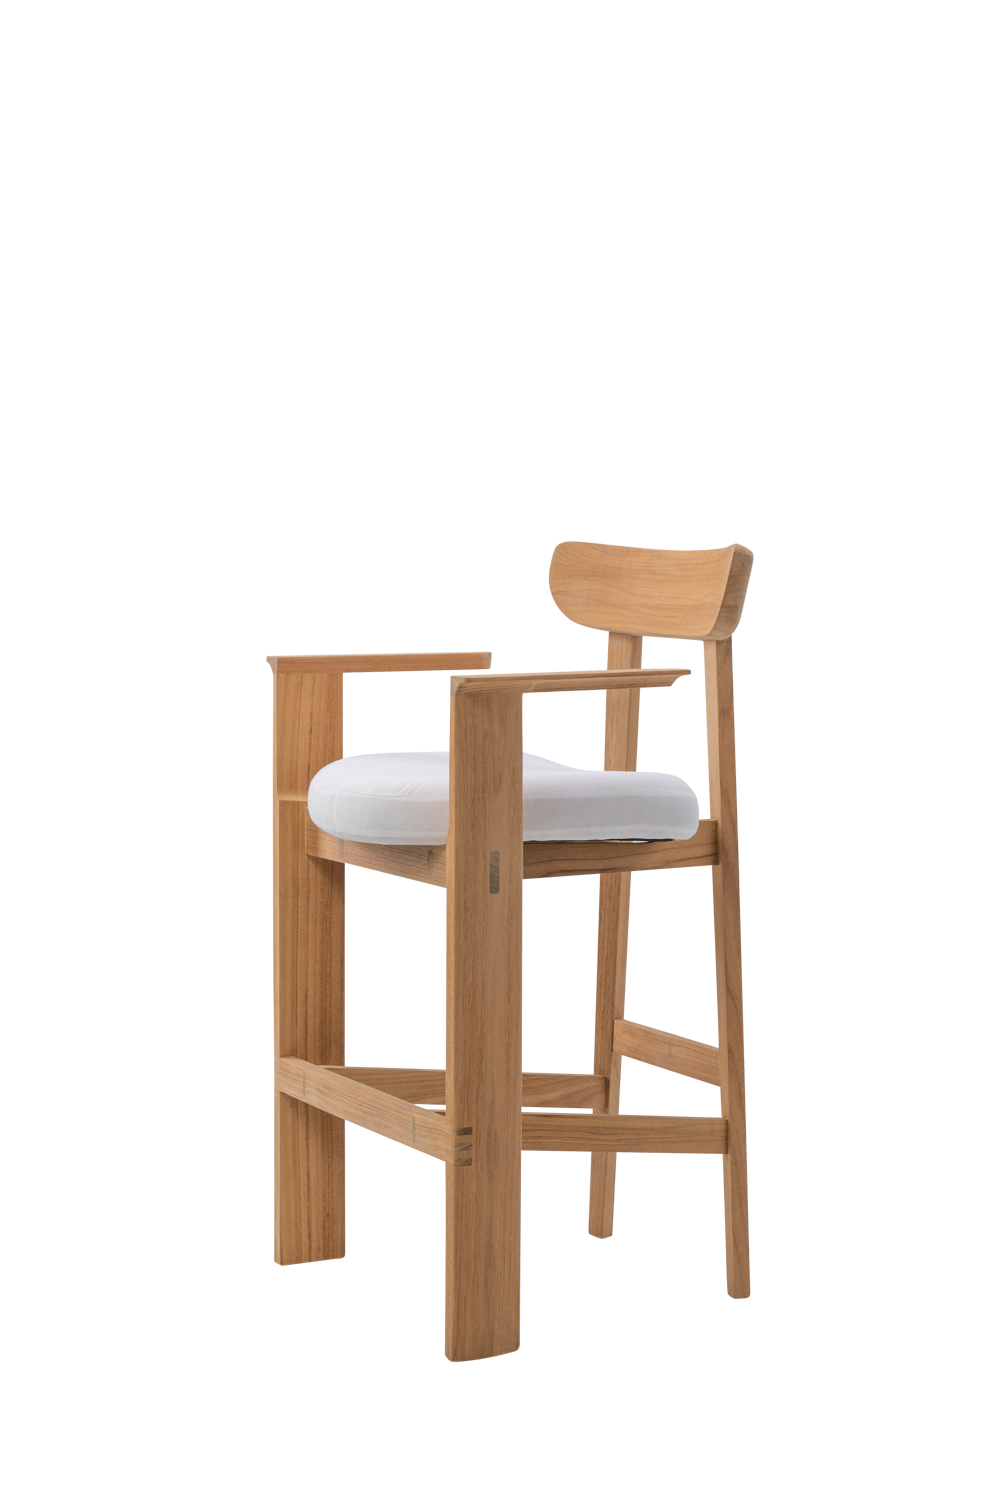 Teak-framed stool with armrests and upholstered seat cushion